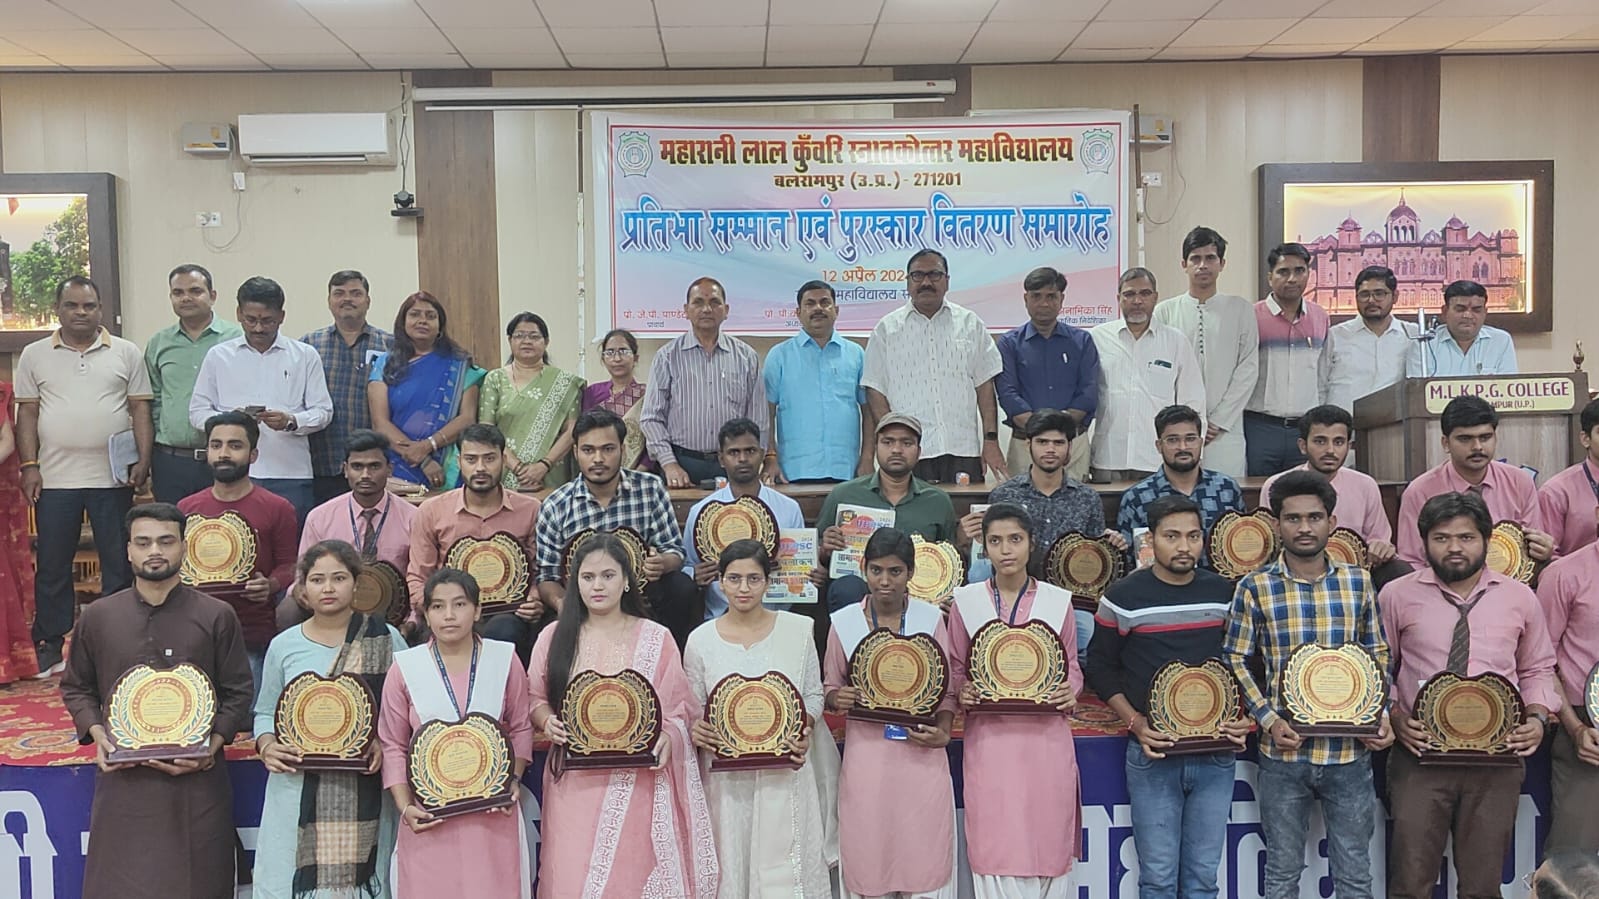 Talent felicitation and prize distribution ceremony was organized on Friday in MLK PG College Auditorium.